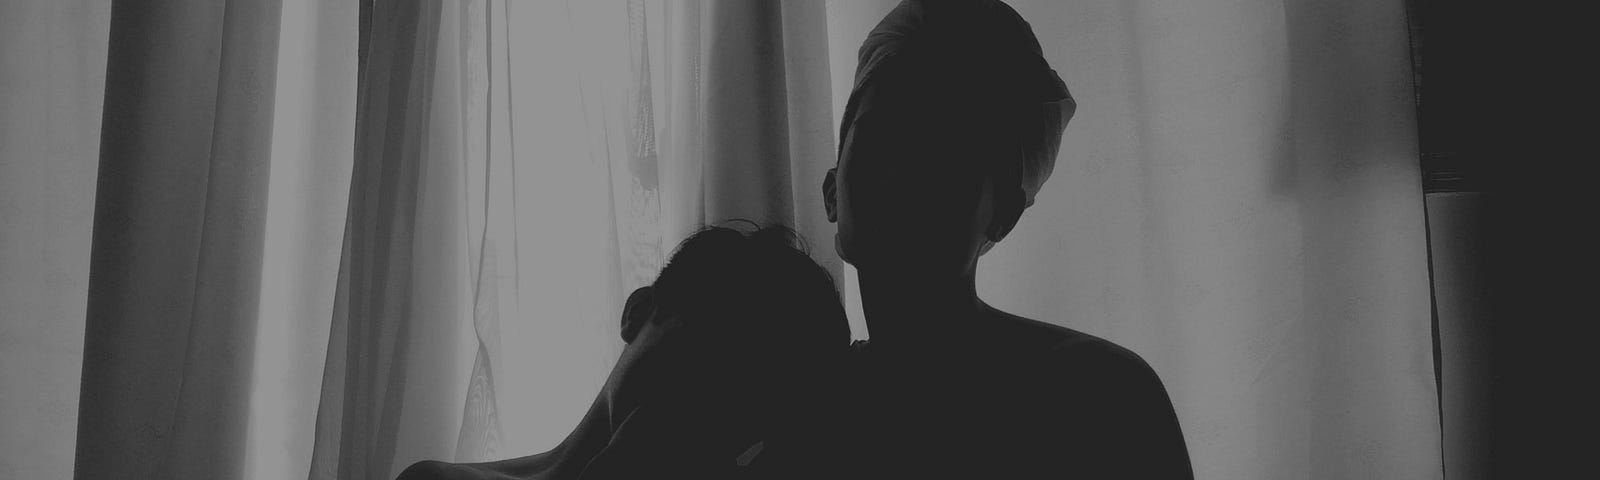 A black and white of two people’s silhouettes in front of a curtained window.